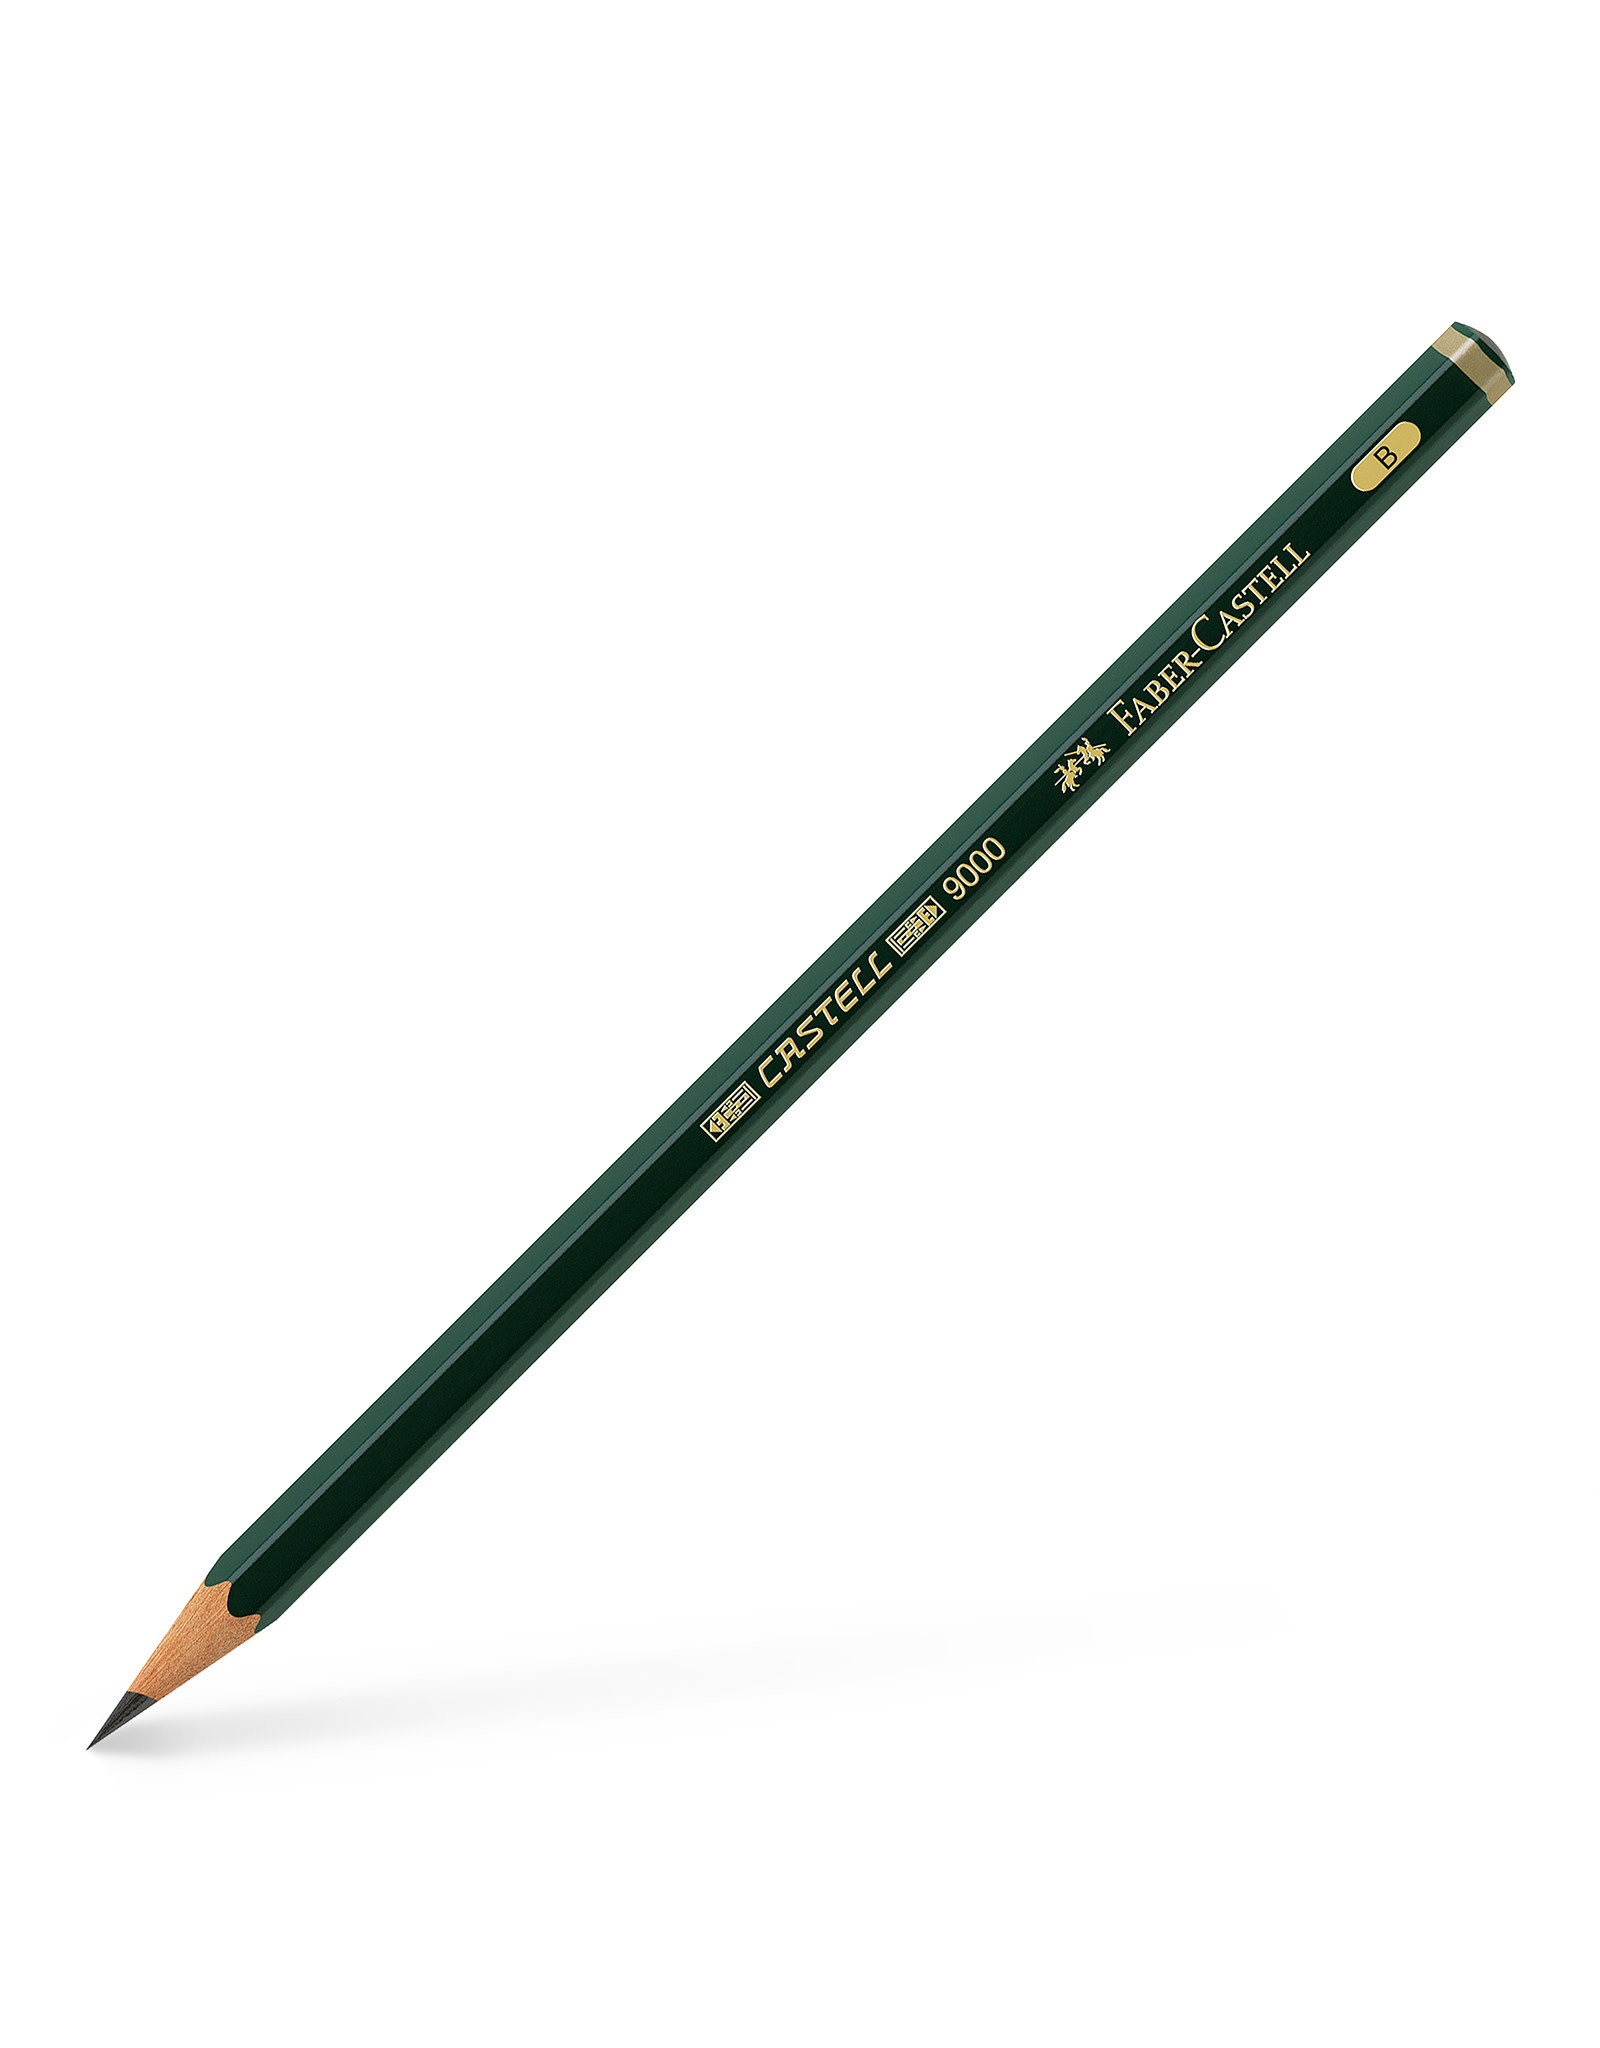 FABER-CASTELL Castell® 9000 Graphite Pencil, B